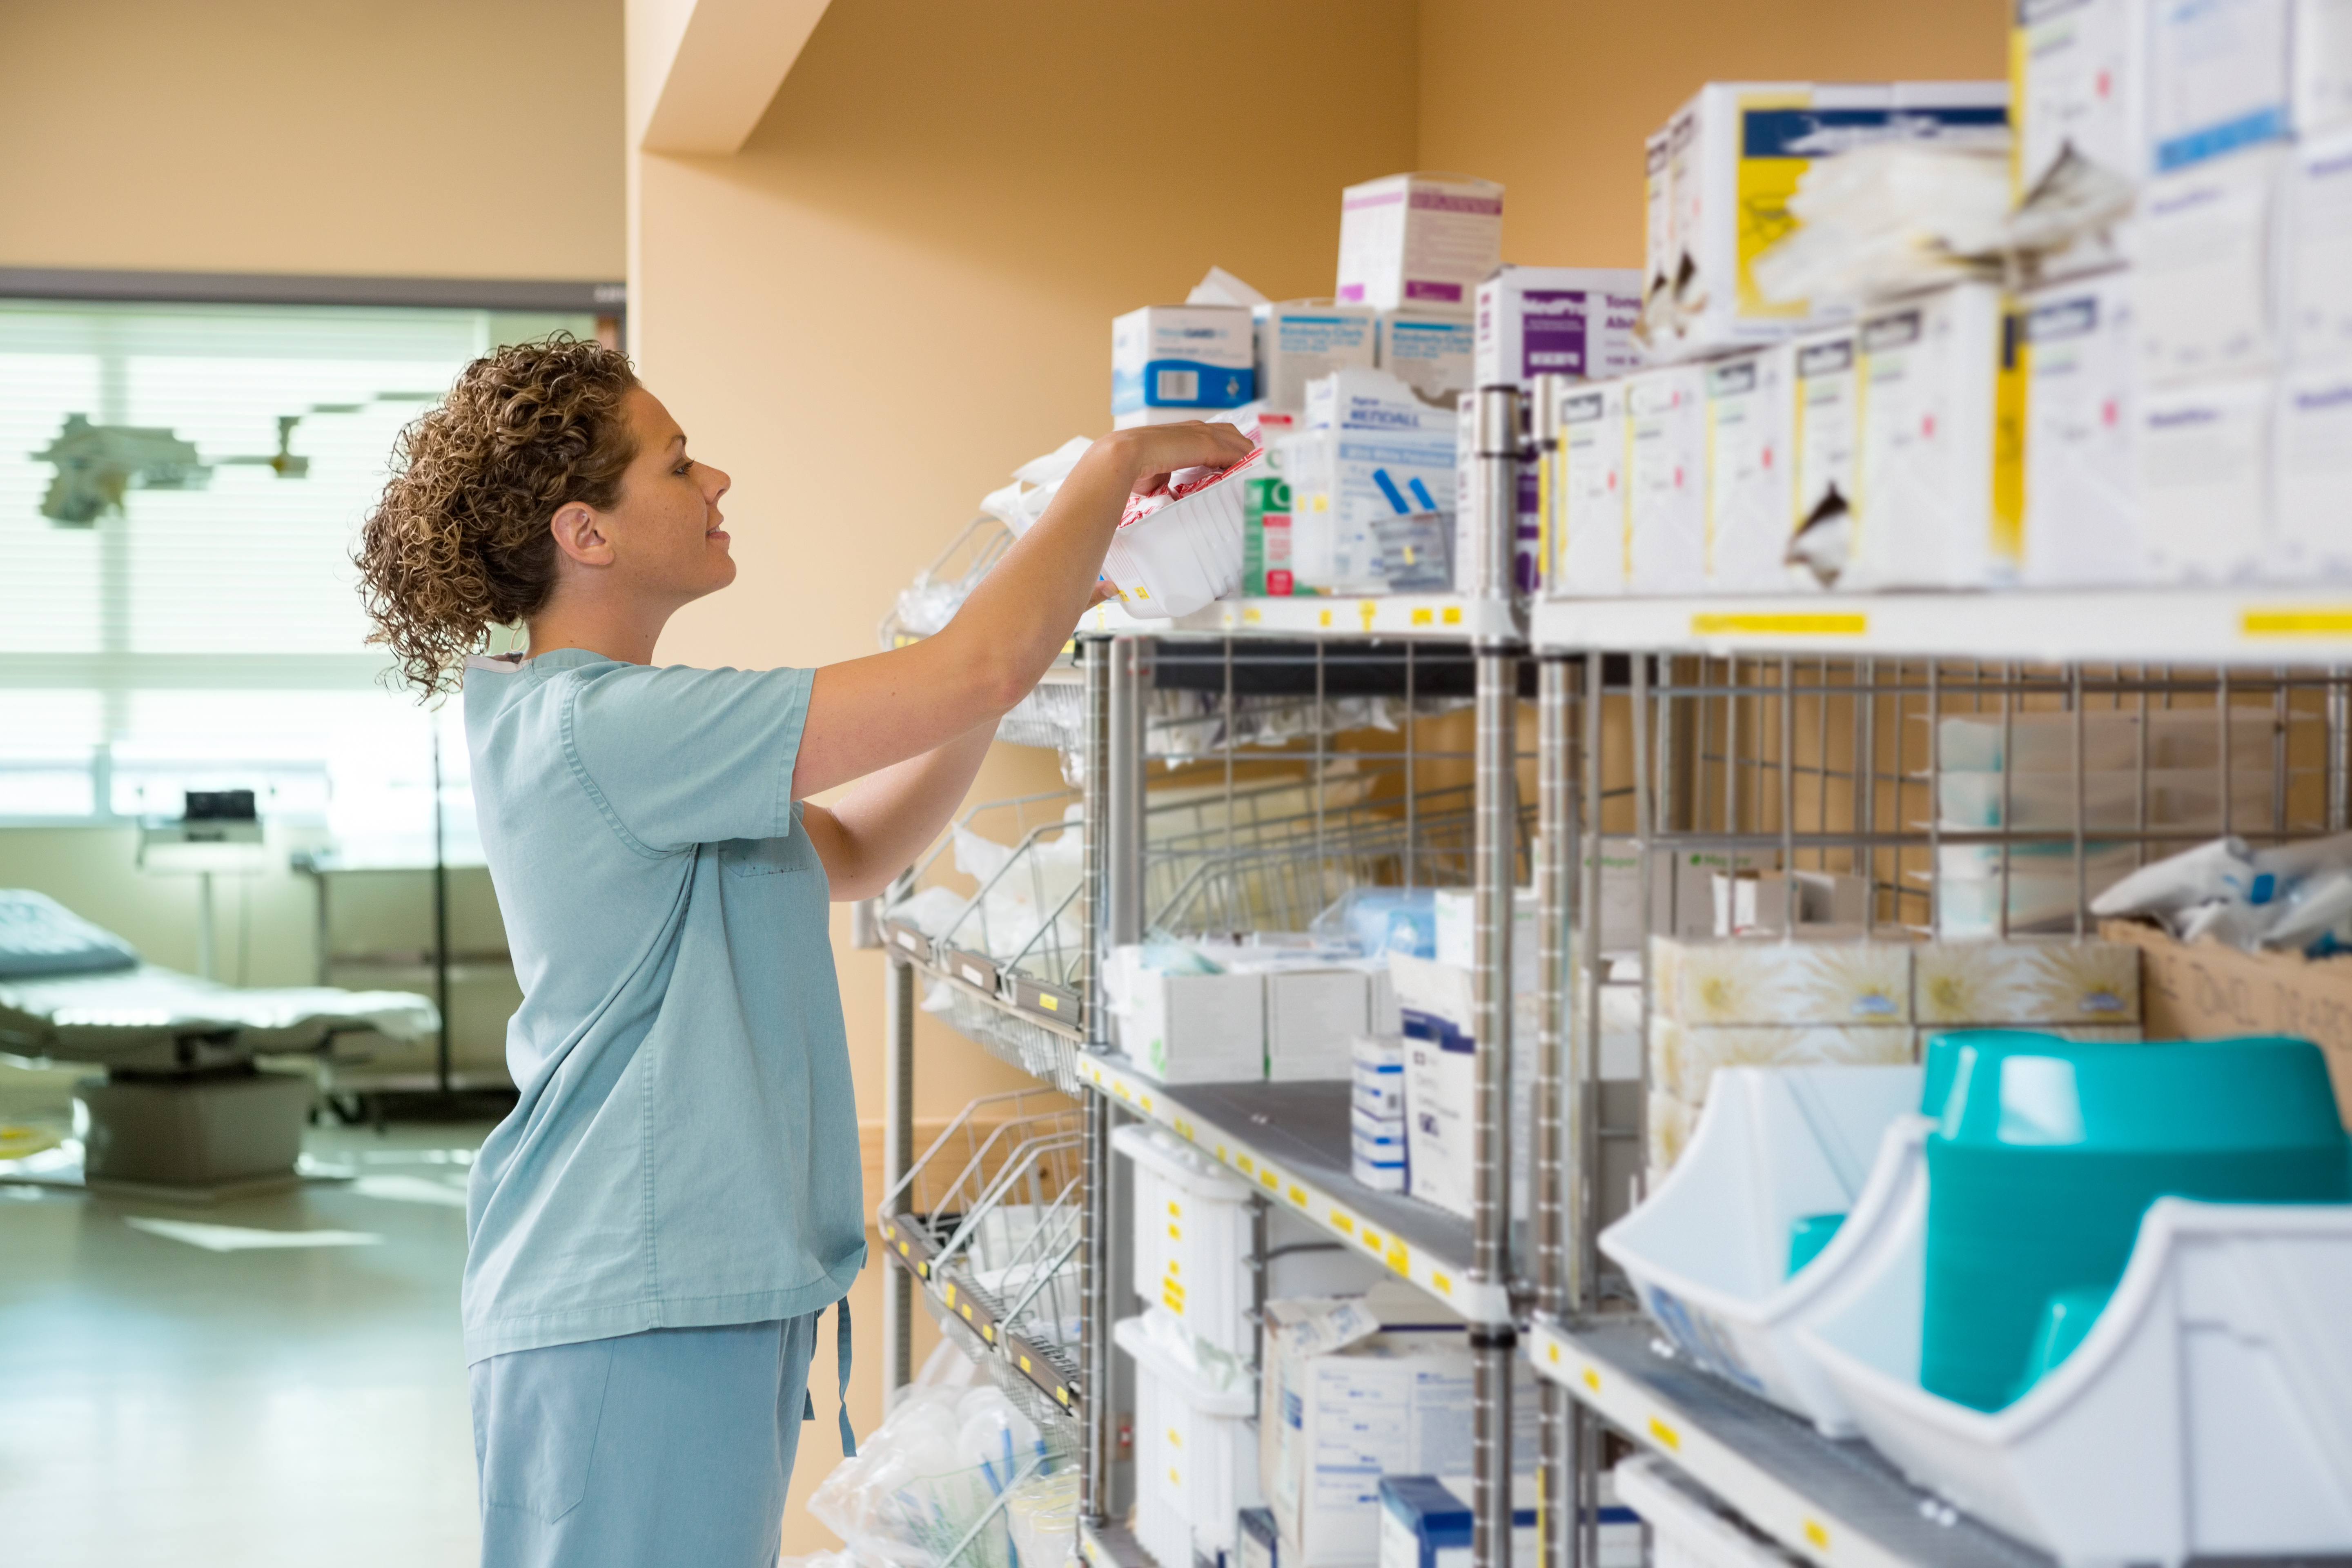 How to Start a Medical Supply Business